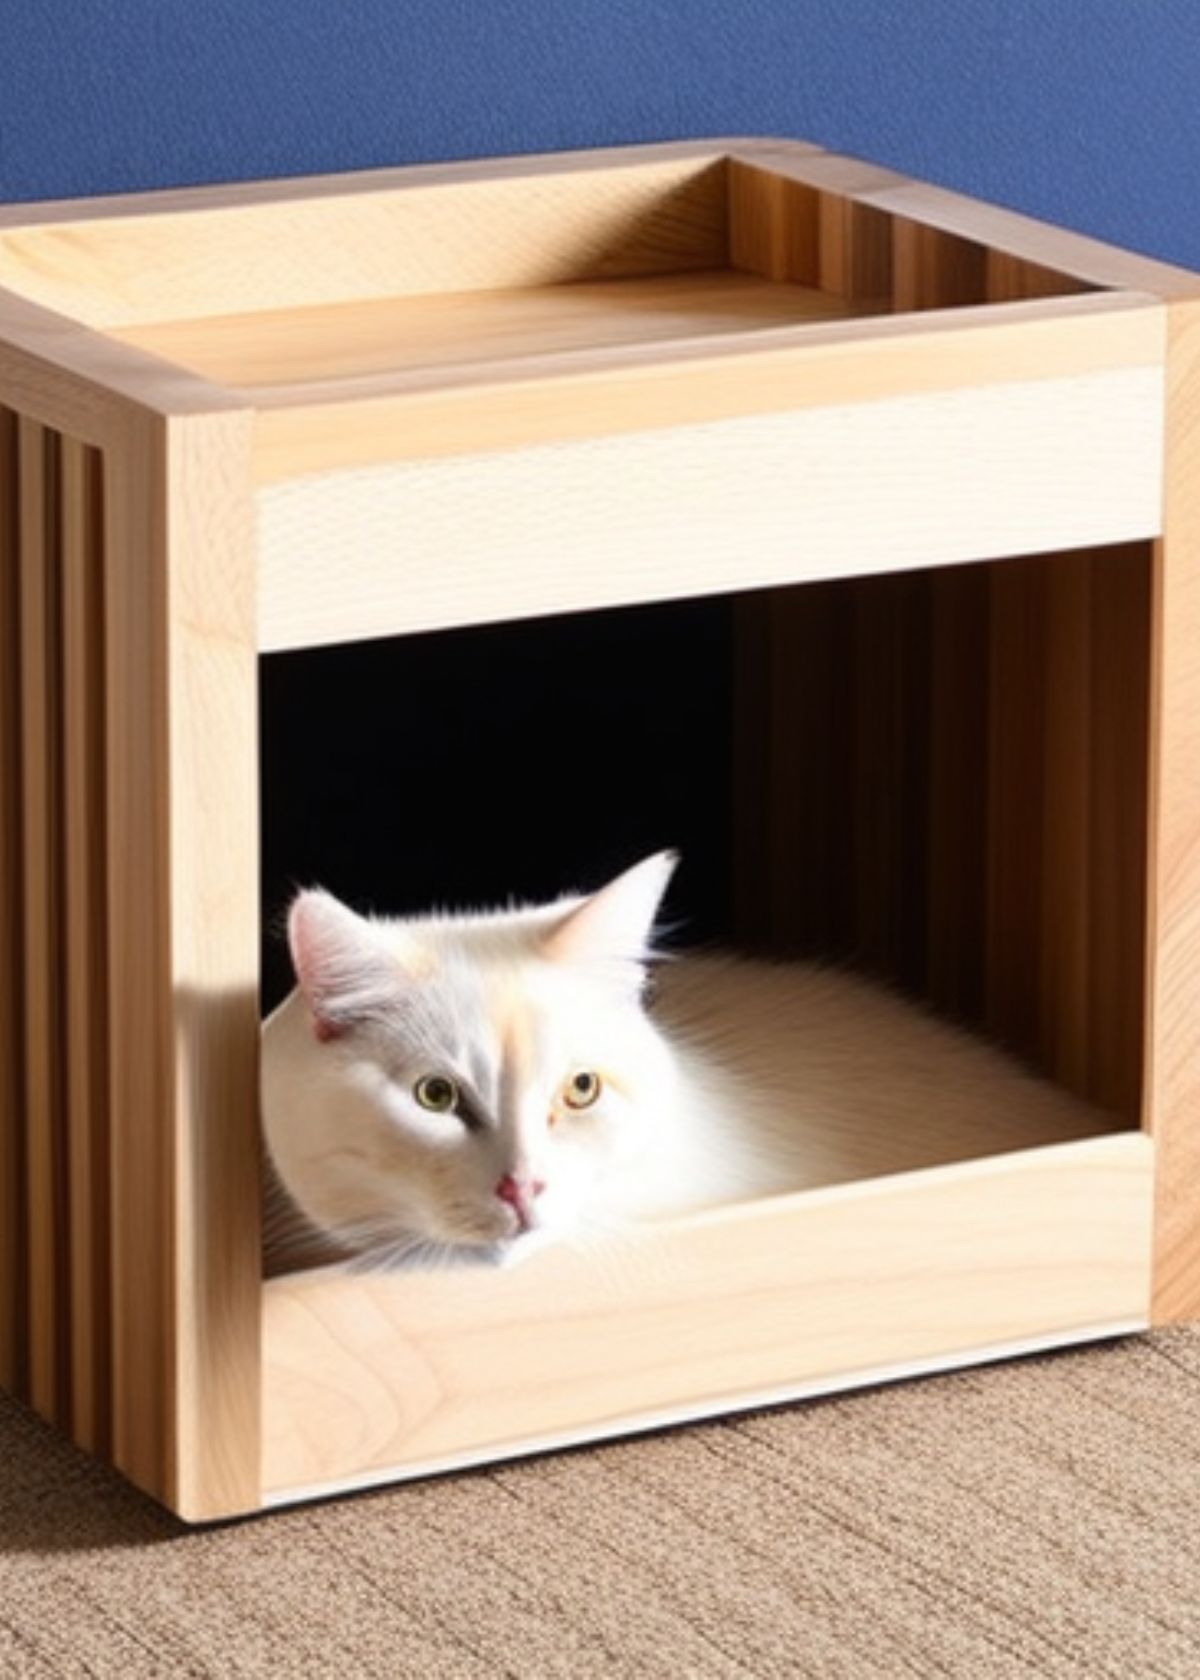 Why Wooden Cat Beds Are the Perfect Gift for Your Feline Friend!